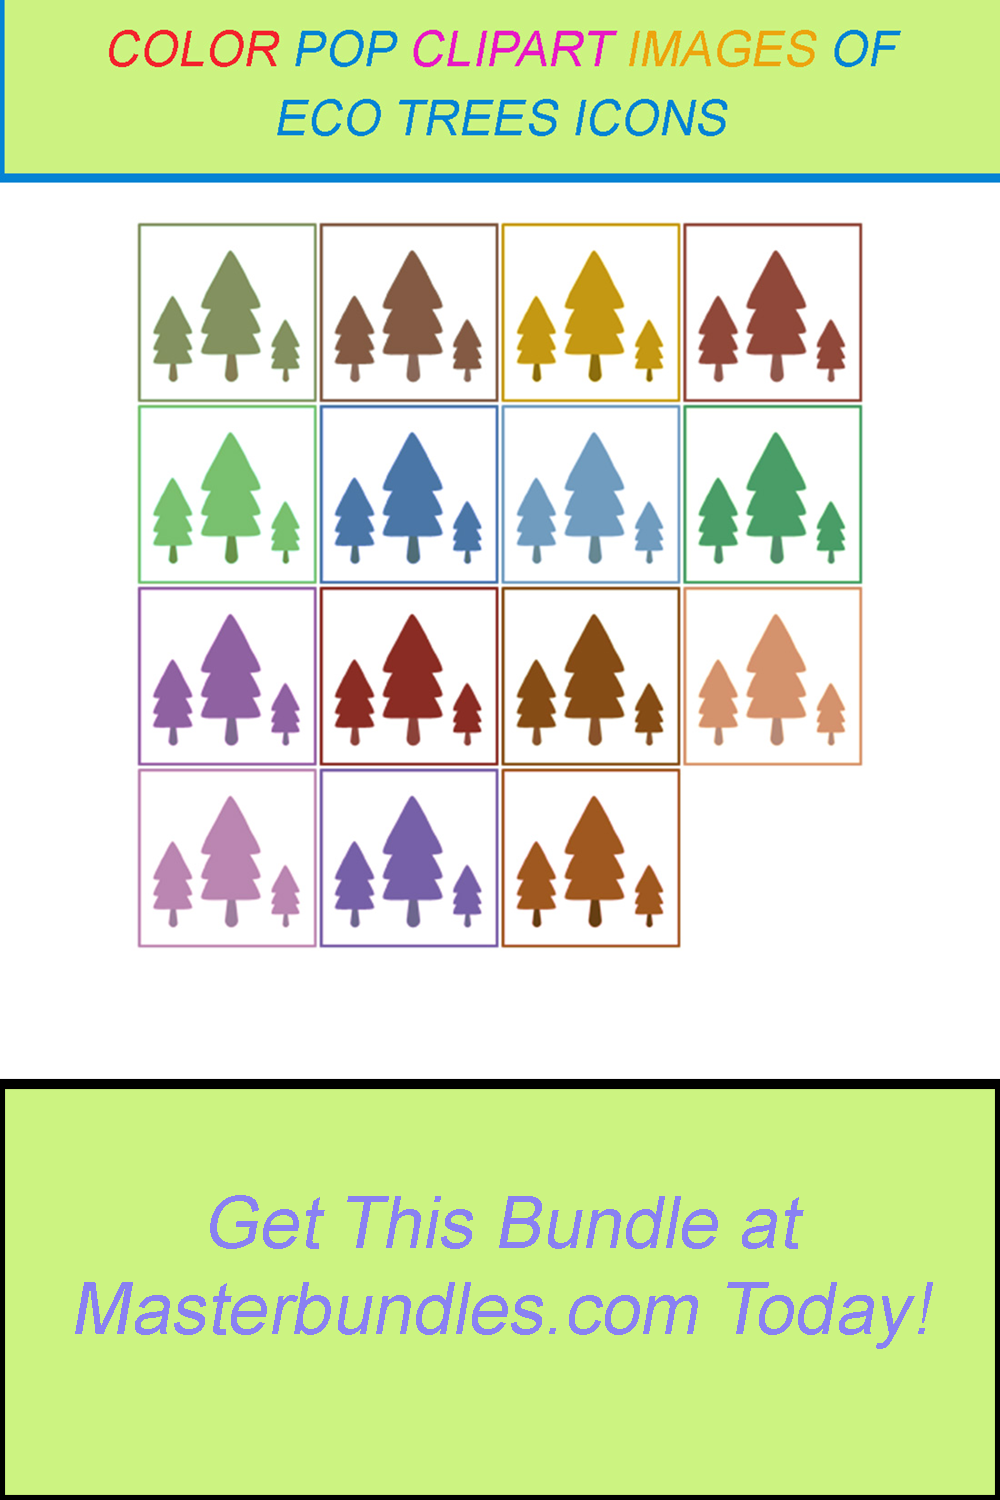 15 COLOR POP CLIPART IMAGES OF ECO TREES ICONS pinterest preview image.